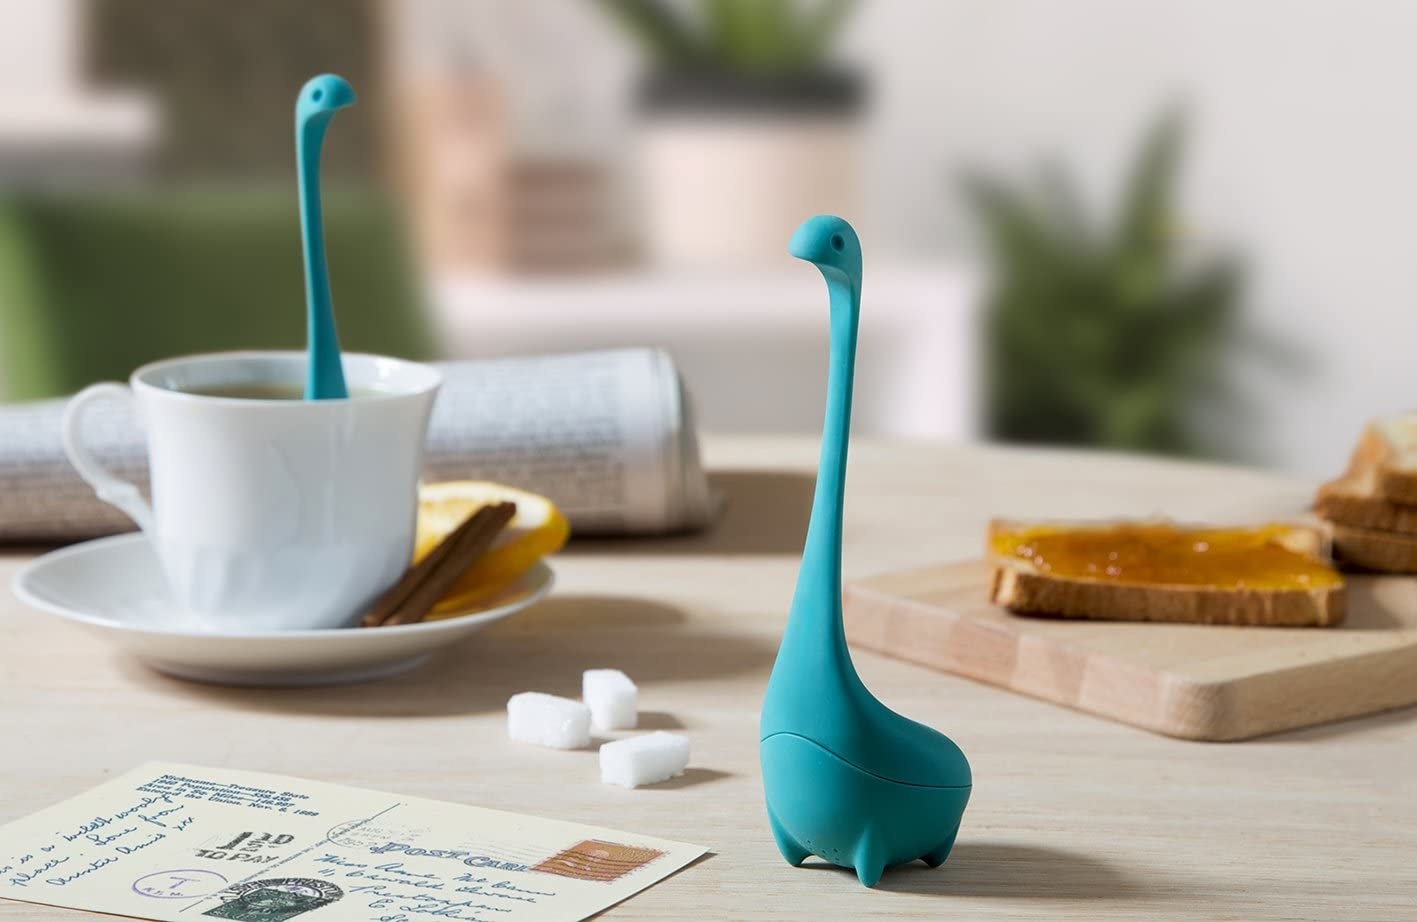 Two loch ness tea infusers on a kitchen table with some toast and mail